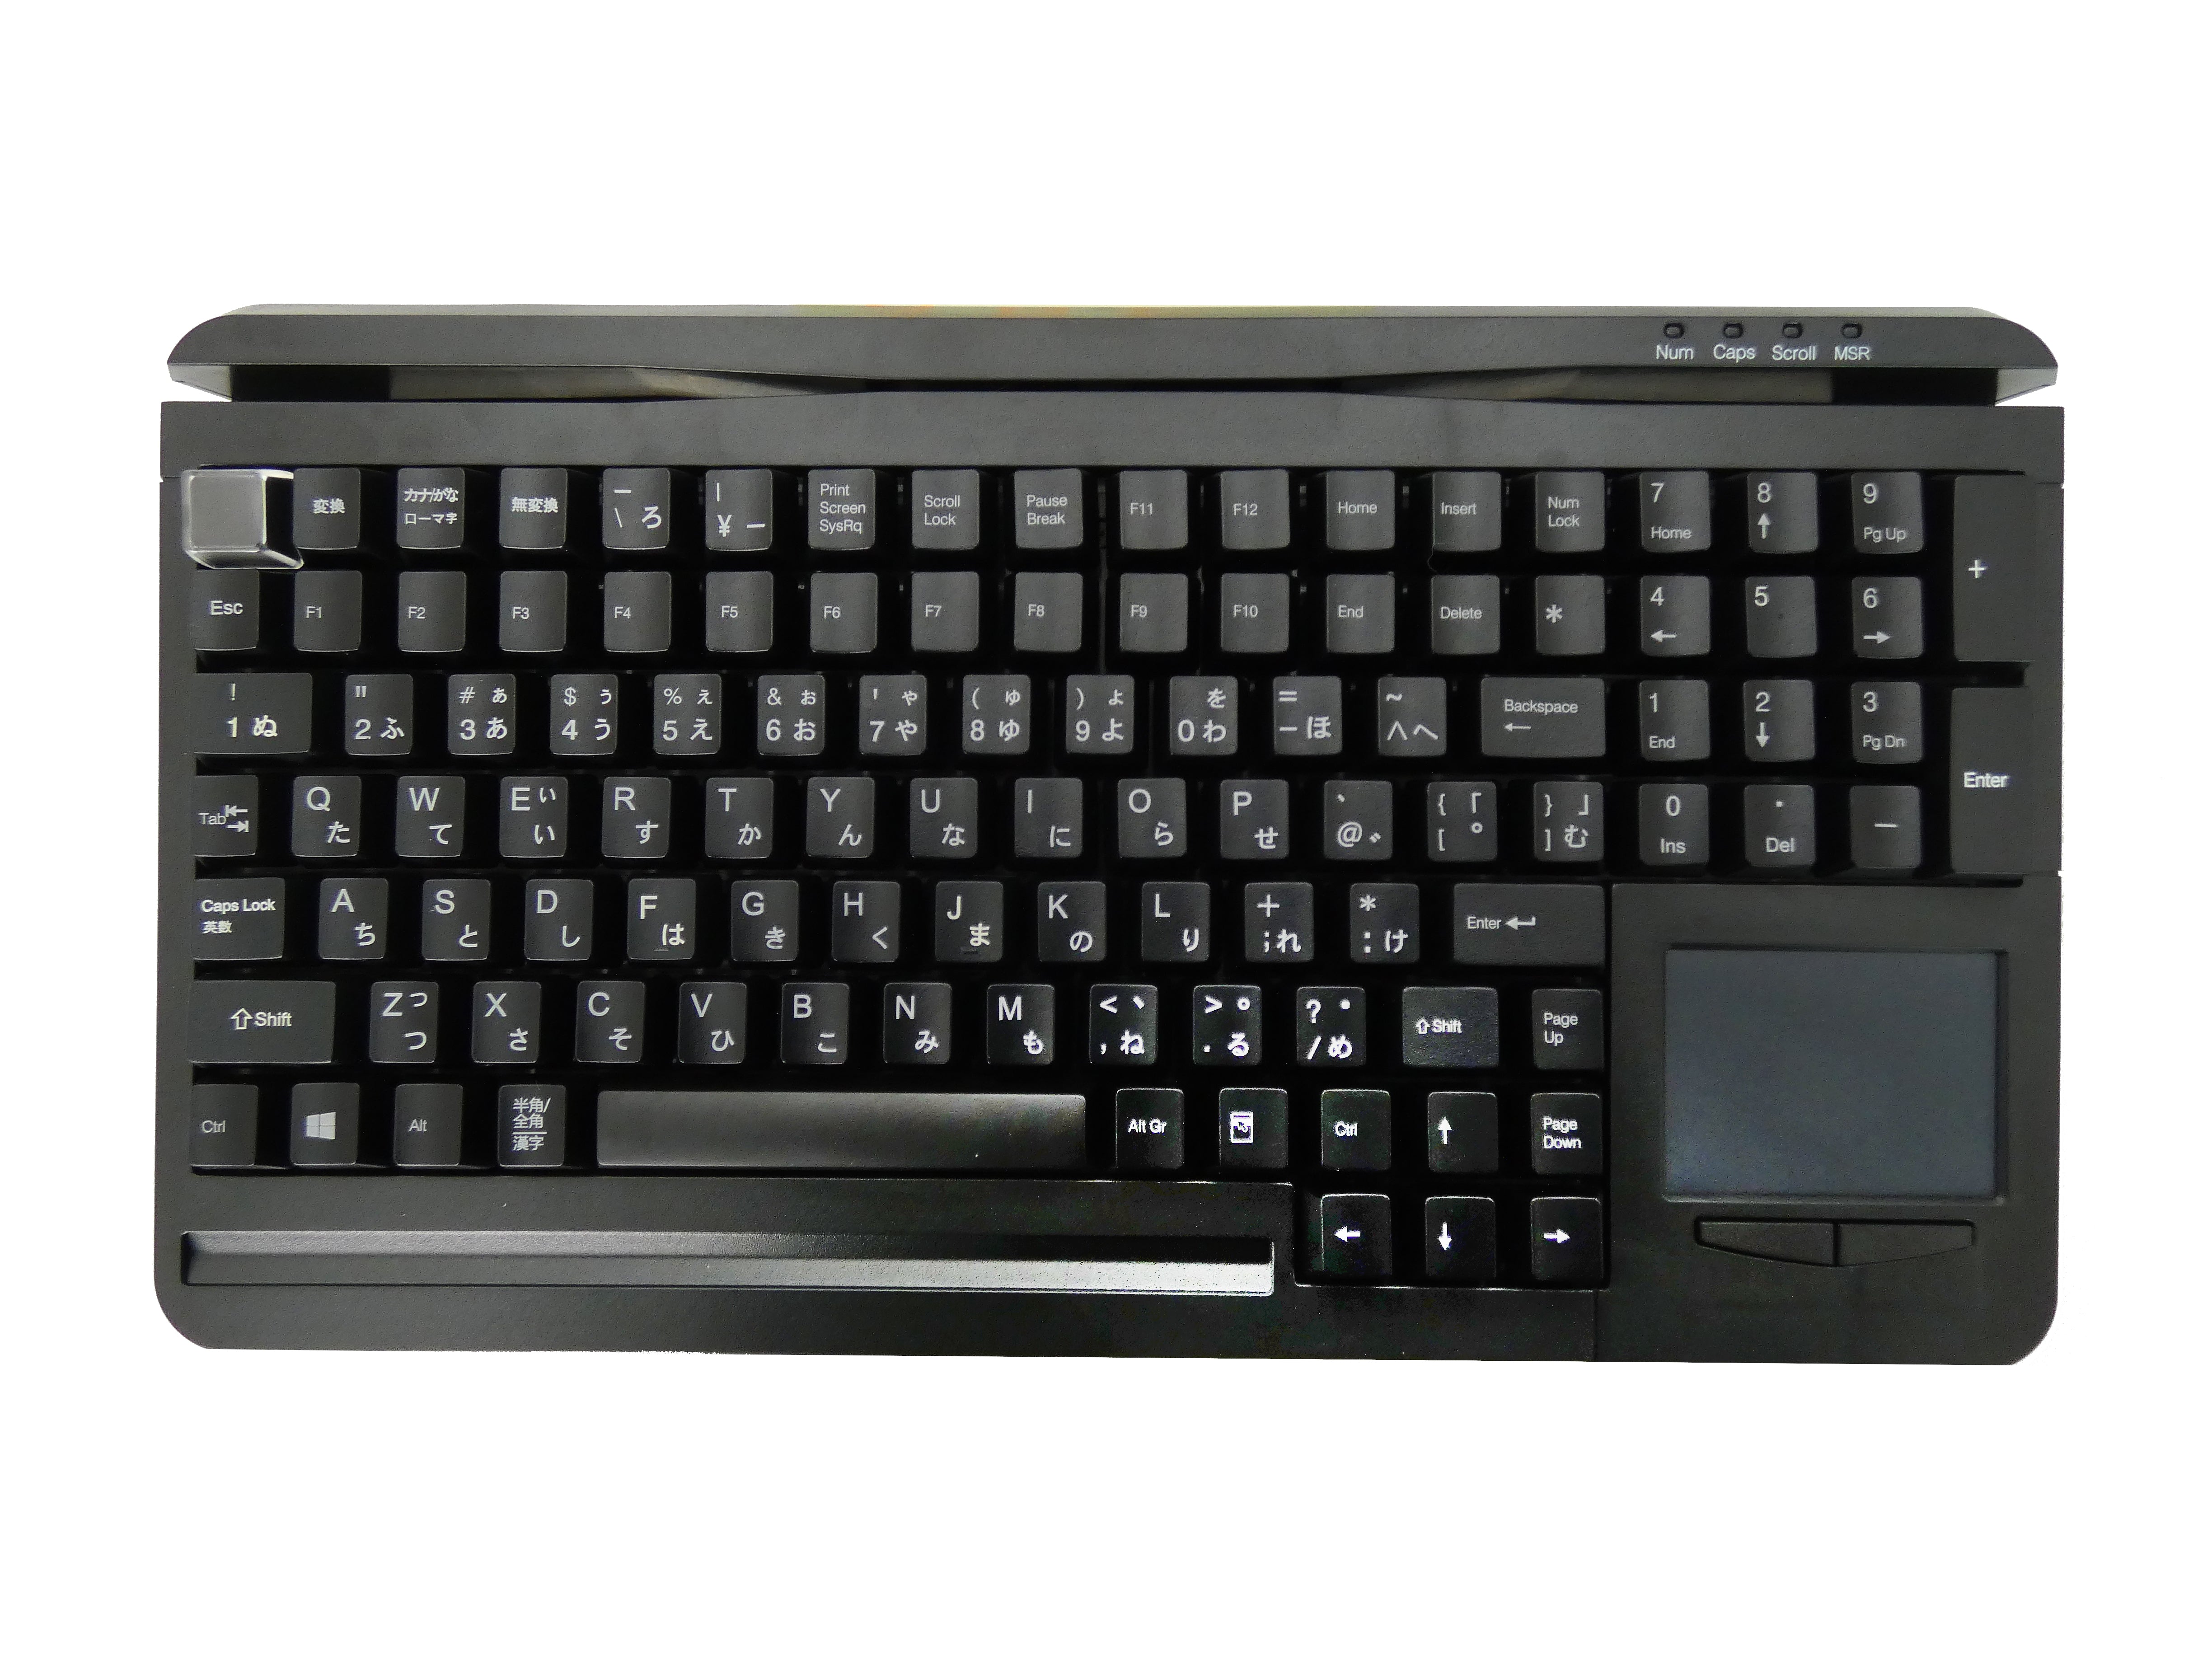 Accuratus S109P - PS2 Compact QWERTY & Programmable POS 109 Key Keyboard with MSR and Touchpad